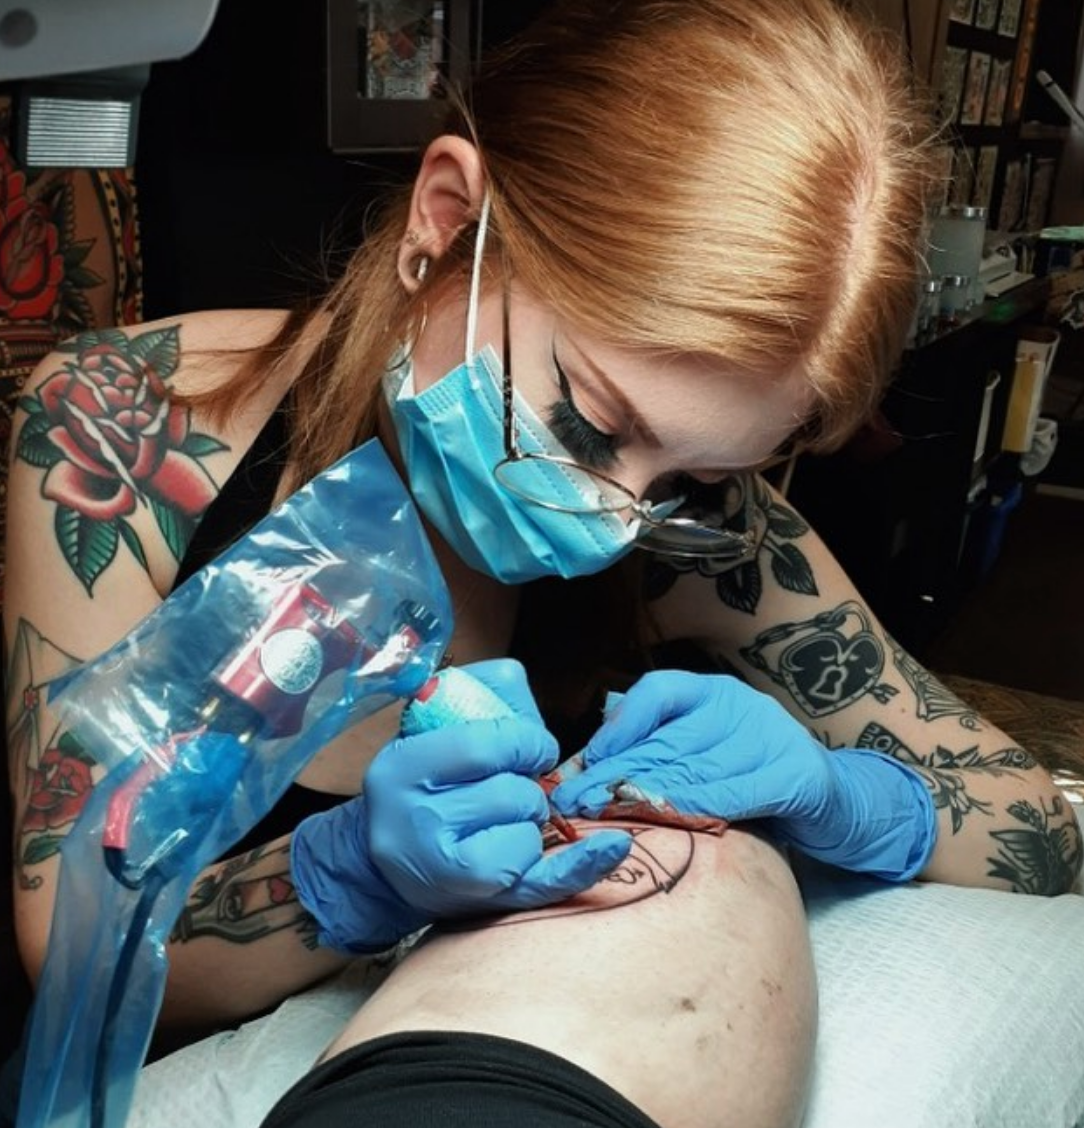 Ottawa tattoo artists dipping into savings, finding other income avenues  during pandemic - CityNews Ottawa